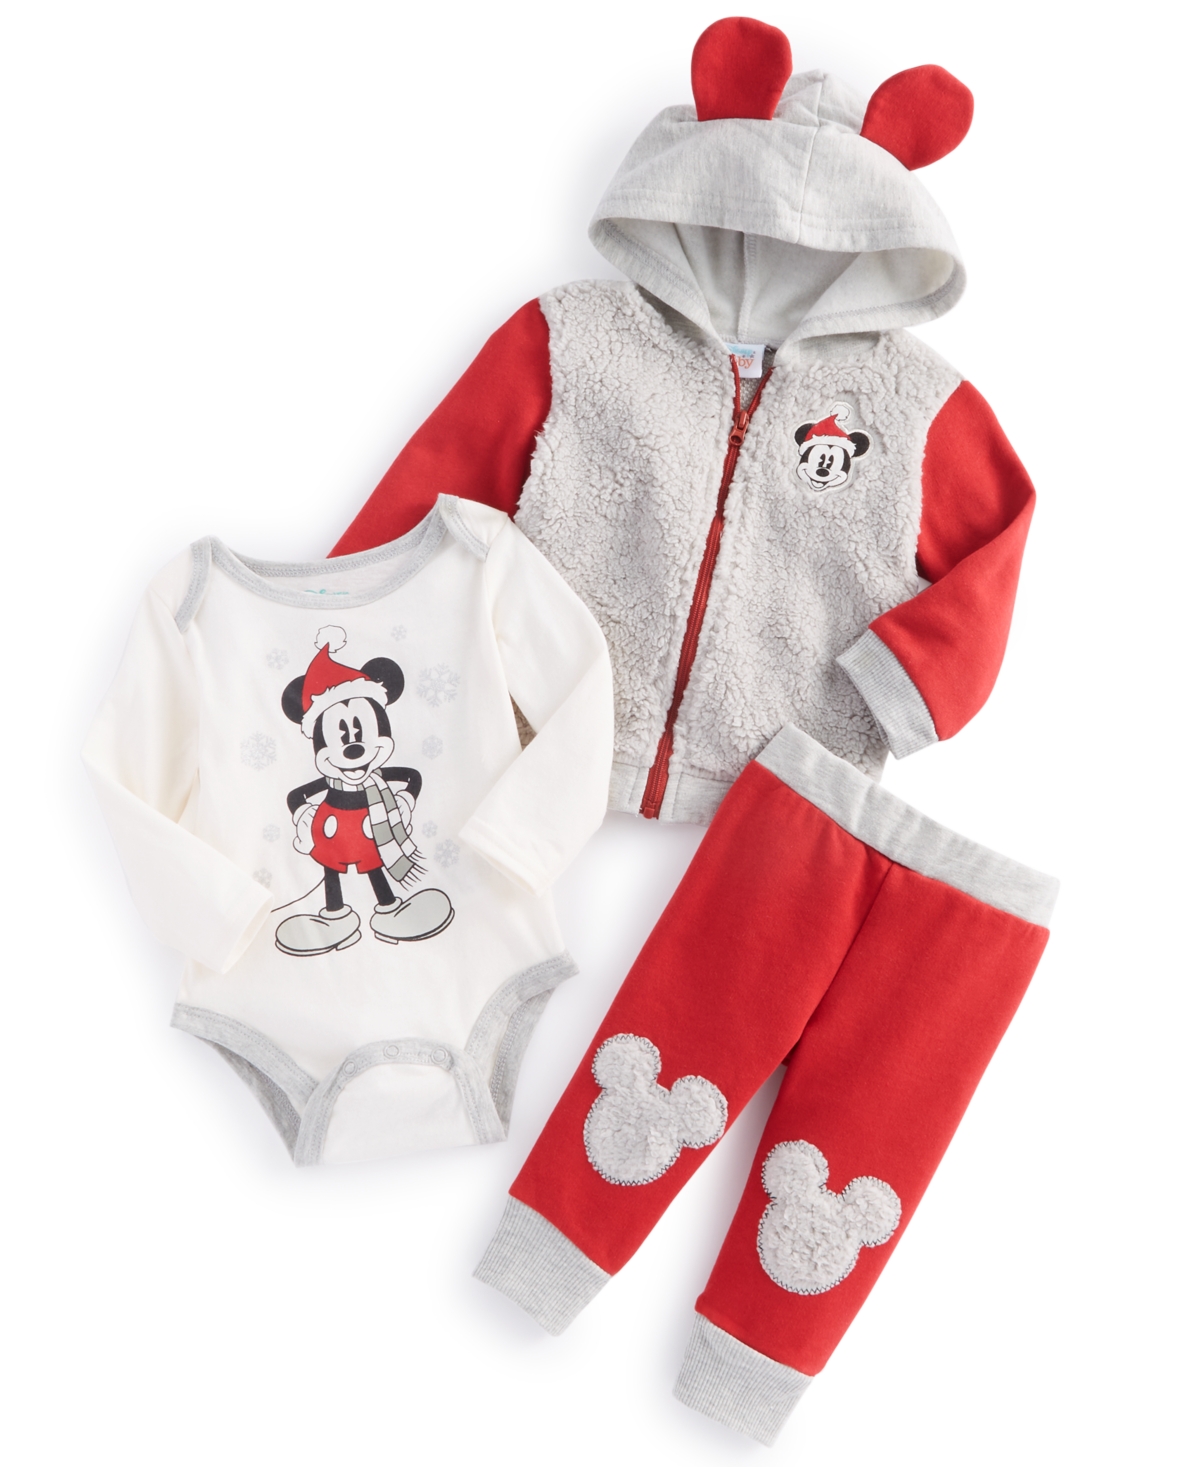 Disney Baby Boys Mickey Mouse Holiday Cozy Jacket, Bodysuit And Joggers Outfit, 3 Piece Set In Chili Pepper,gray,white